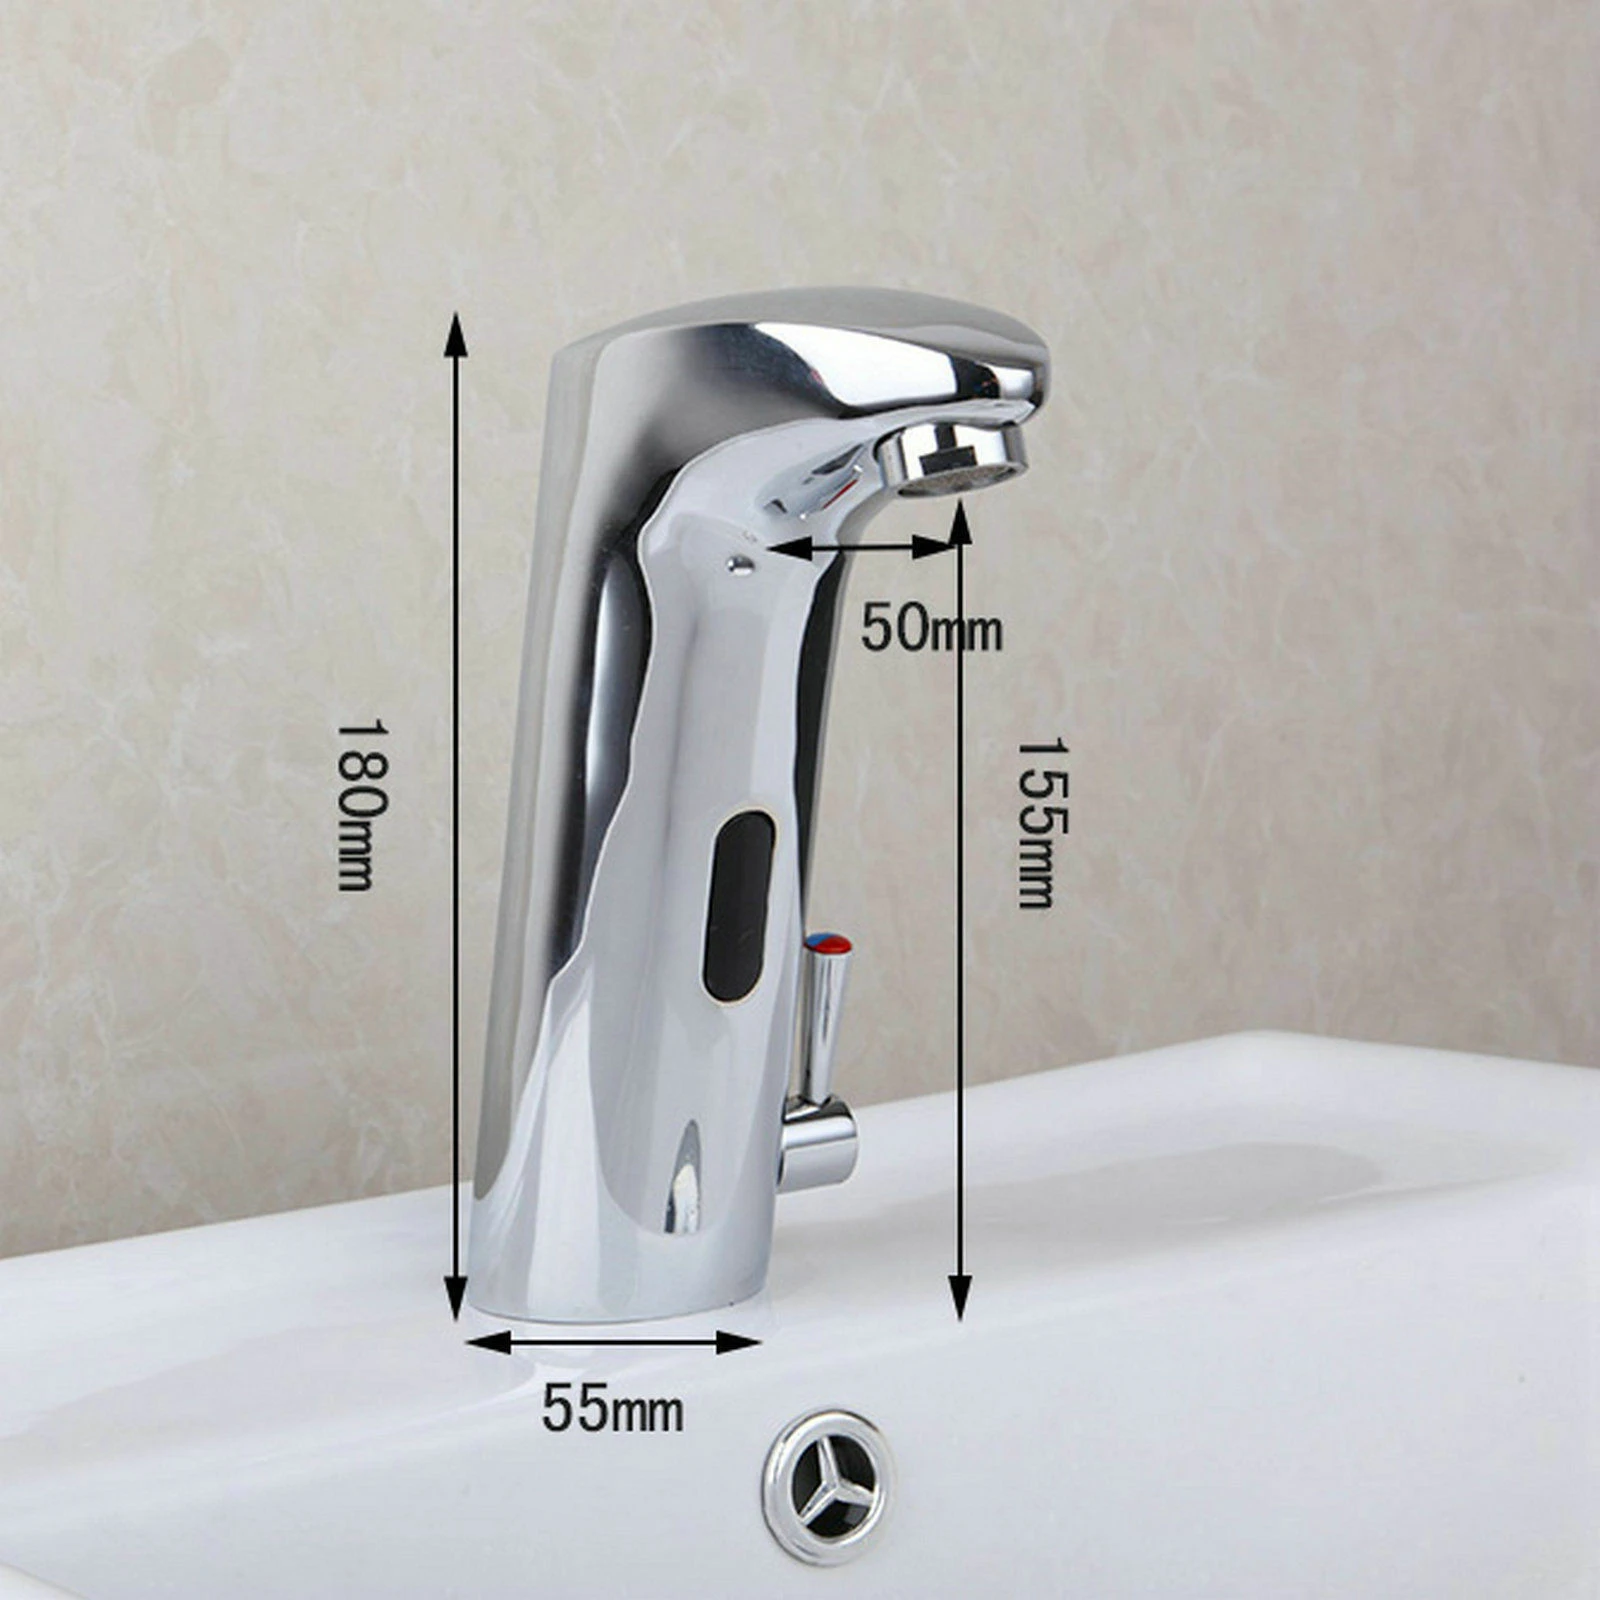 JIENI AA Battery Power Lavatory Bathroom Touch Free Automatic Sensor Tap Sink Hot Cold Mixer Faucet Chrome Brass